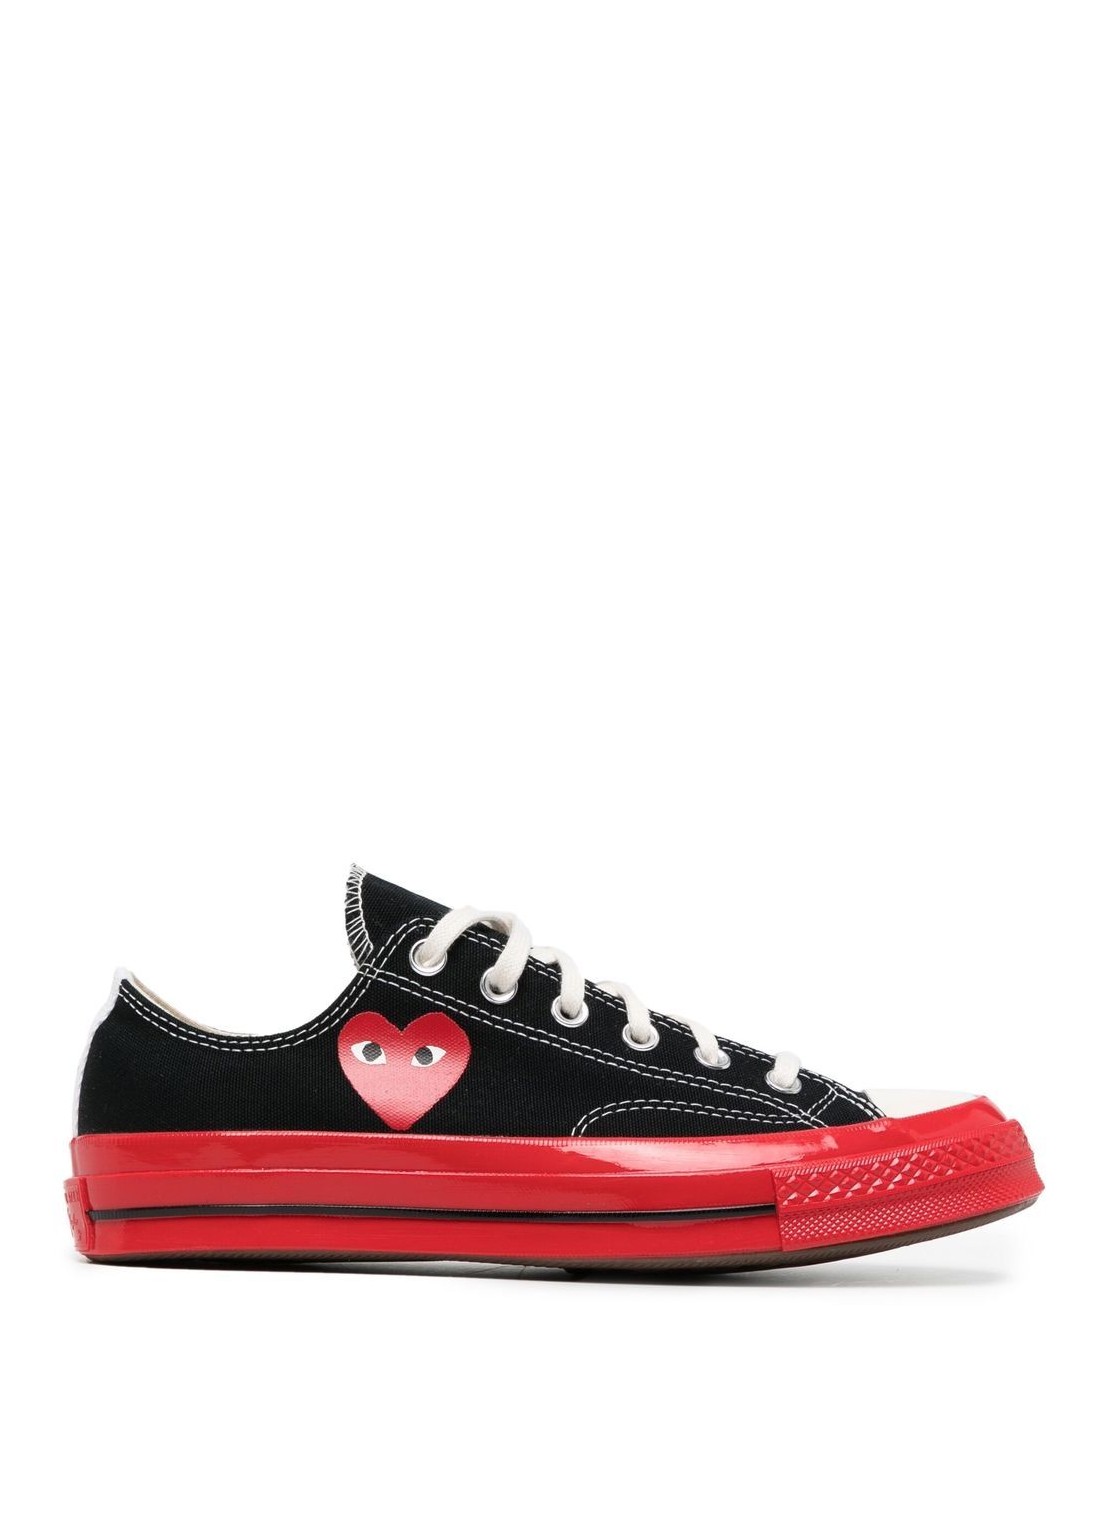 CONVERSE RED SOLE LOW TOP